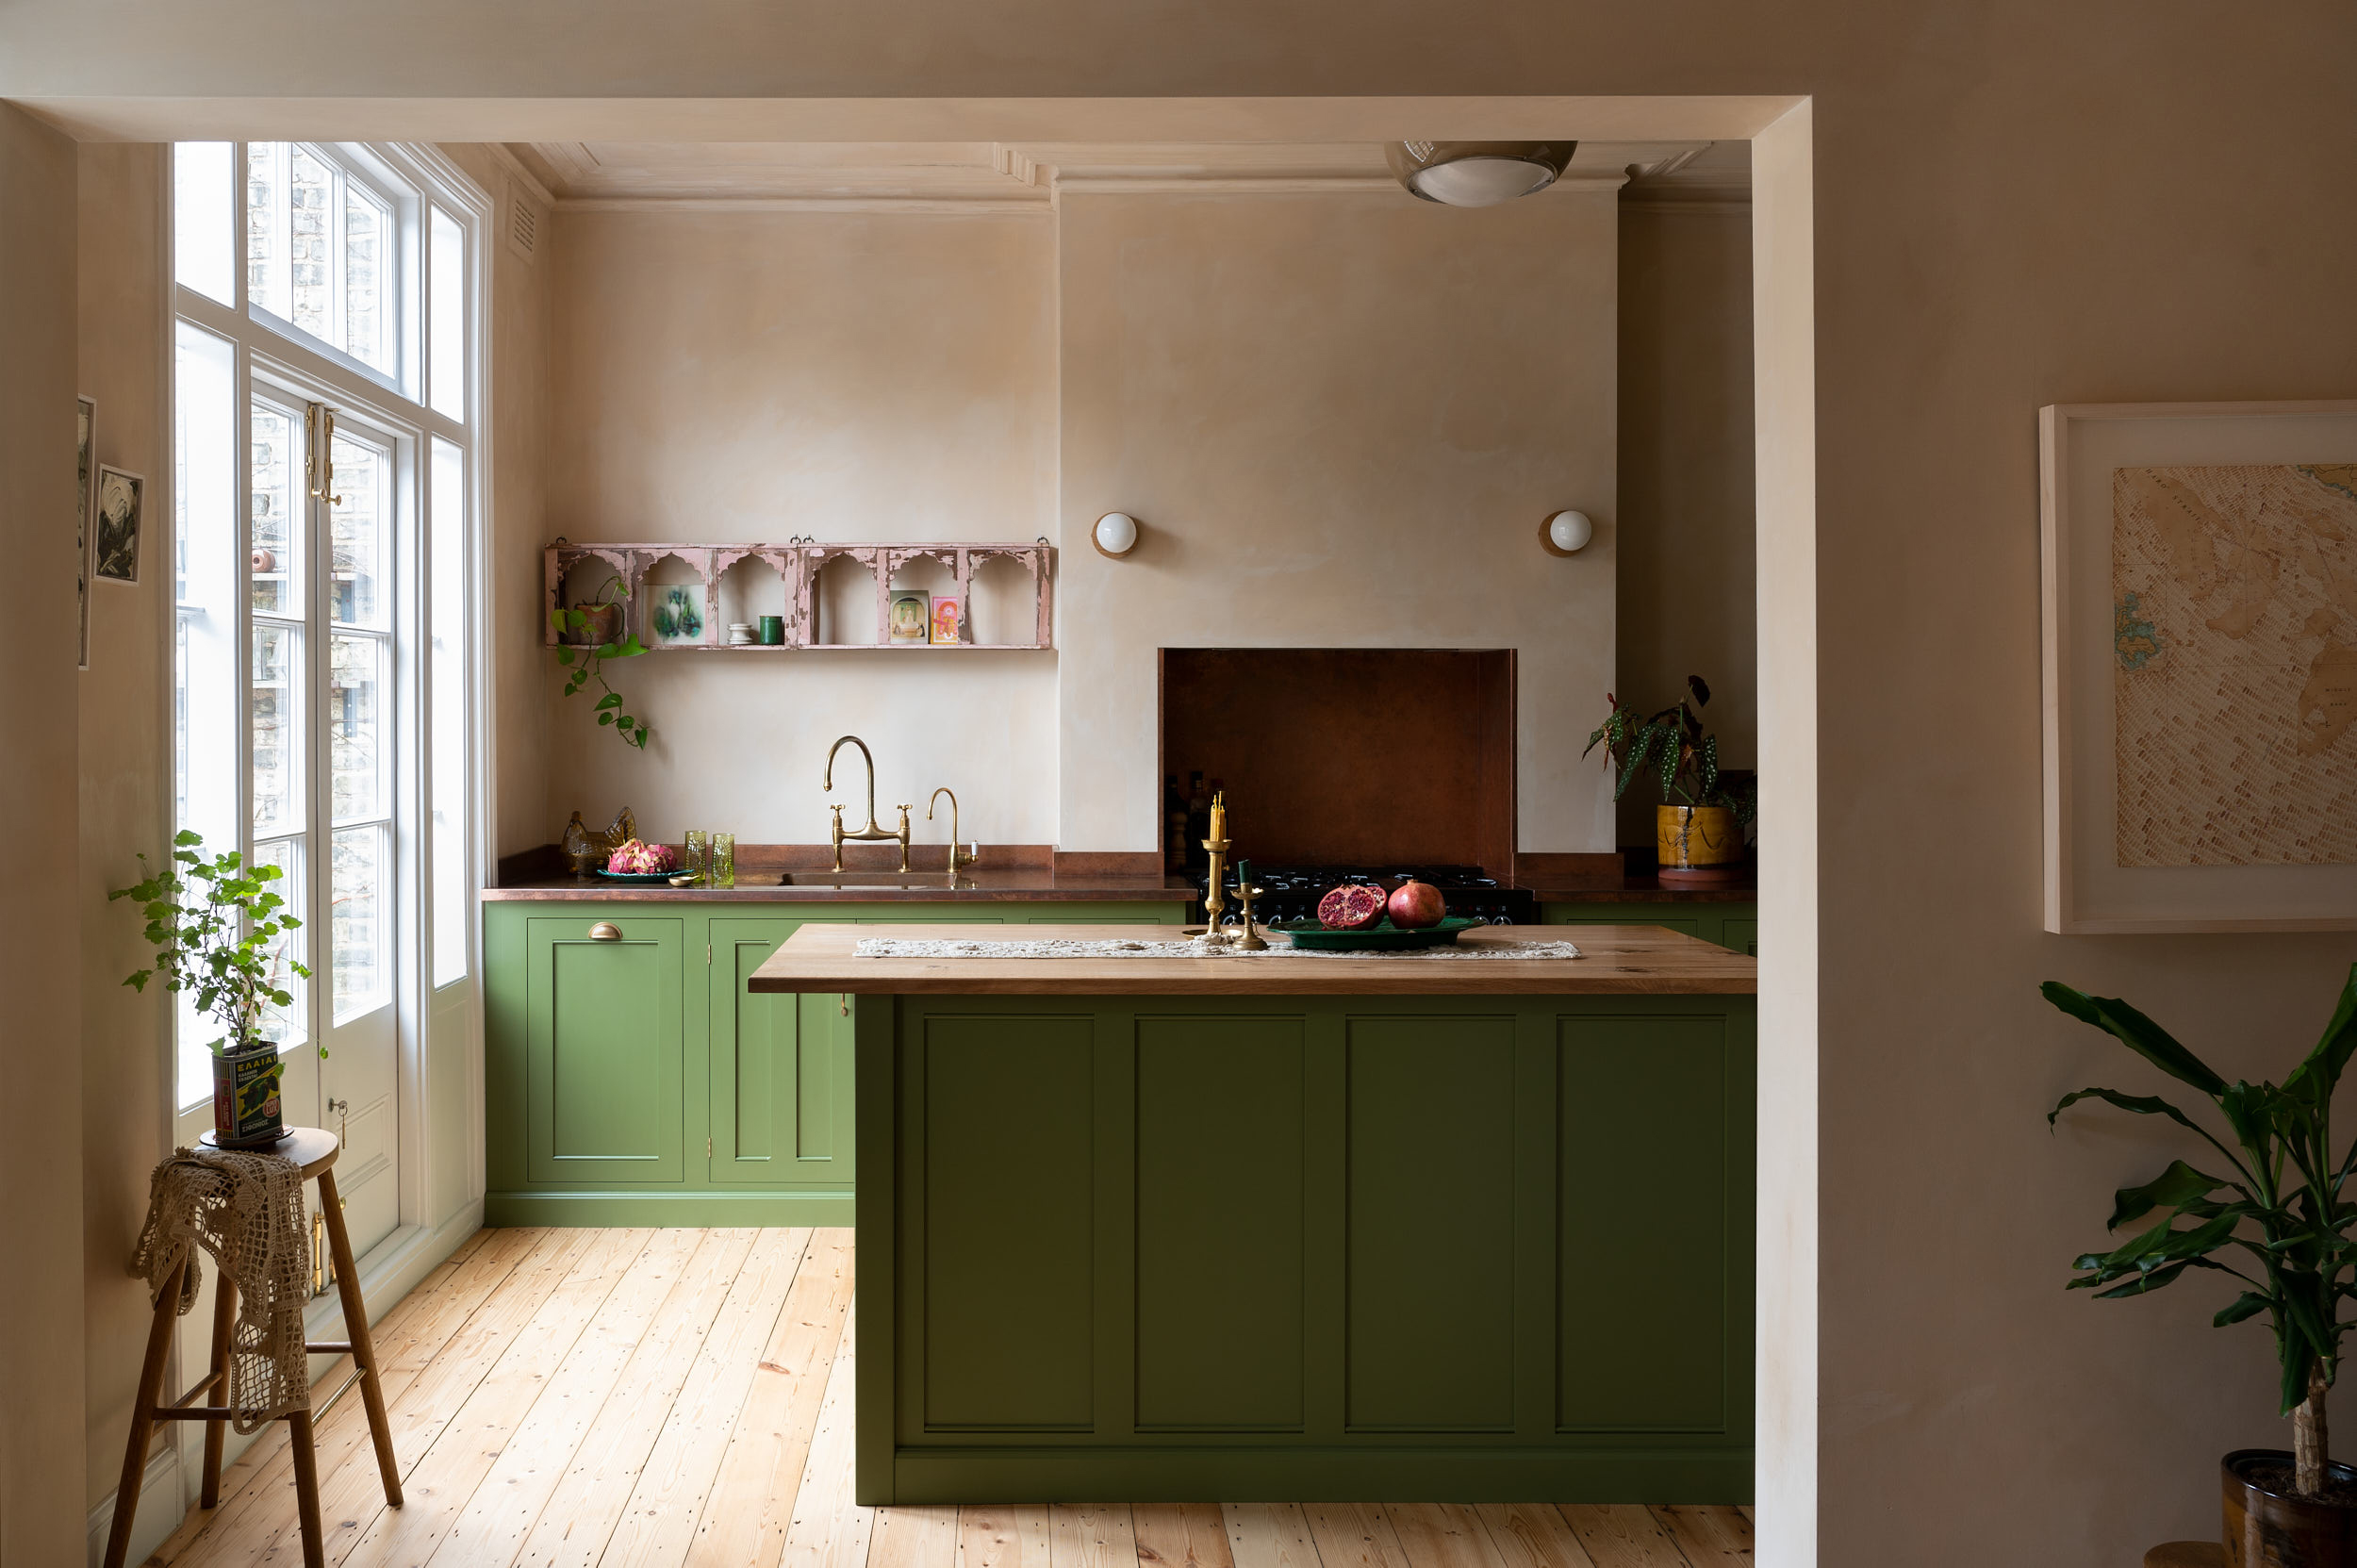 These Glamorous Green Kitchens Will Make You Want to Paint Your Cabinets  Today